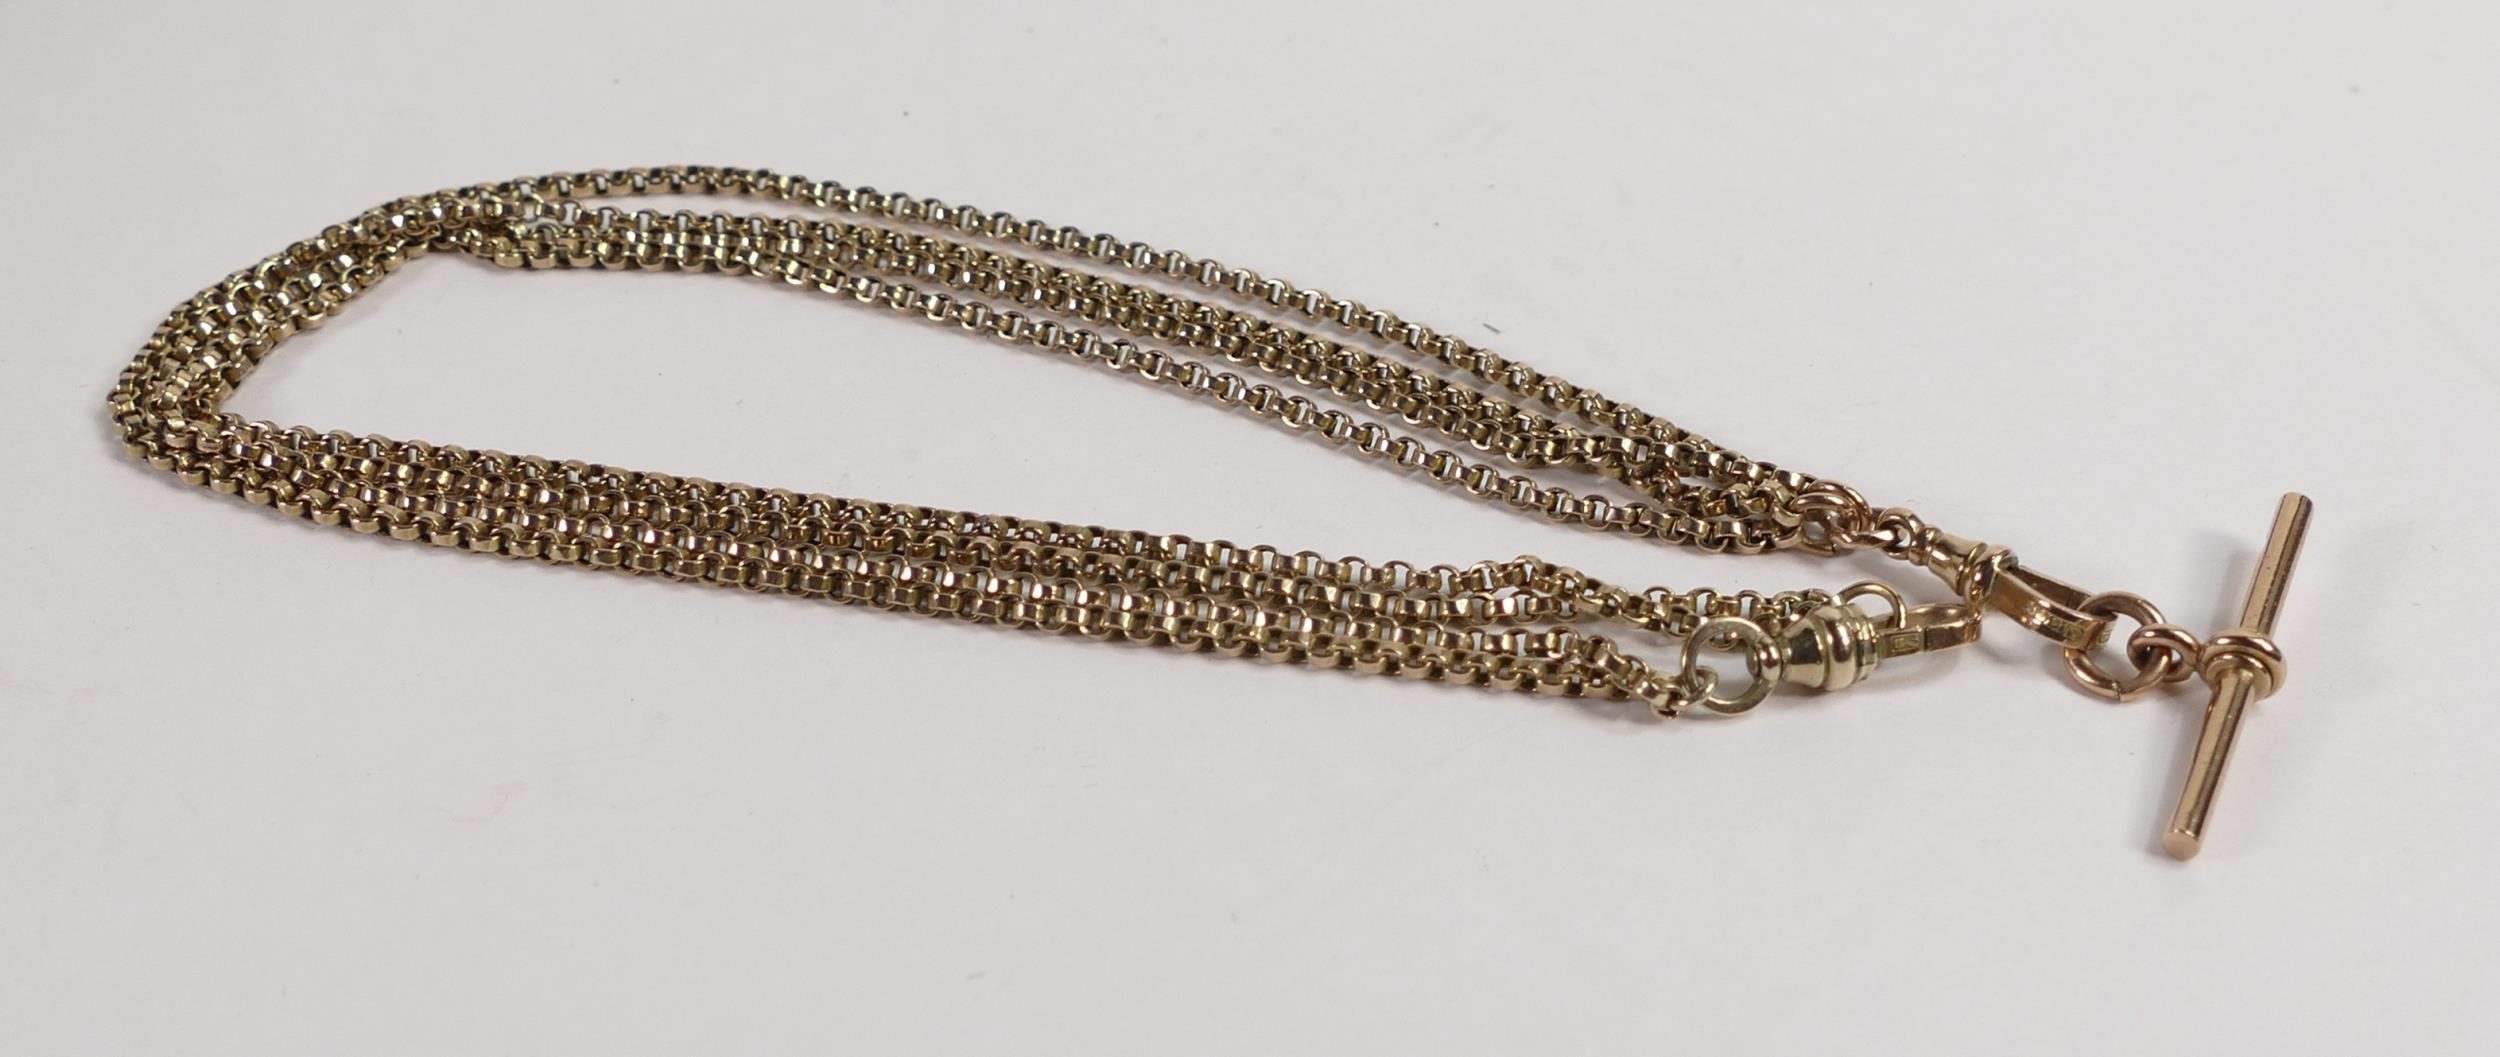 Lot 735 was a Victorian 9ct yellow gold ladies key chain with a 9ct rose gold clasp and t-bar which sold for £460.